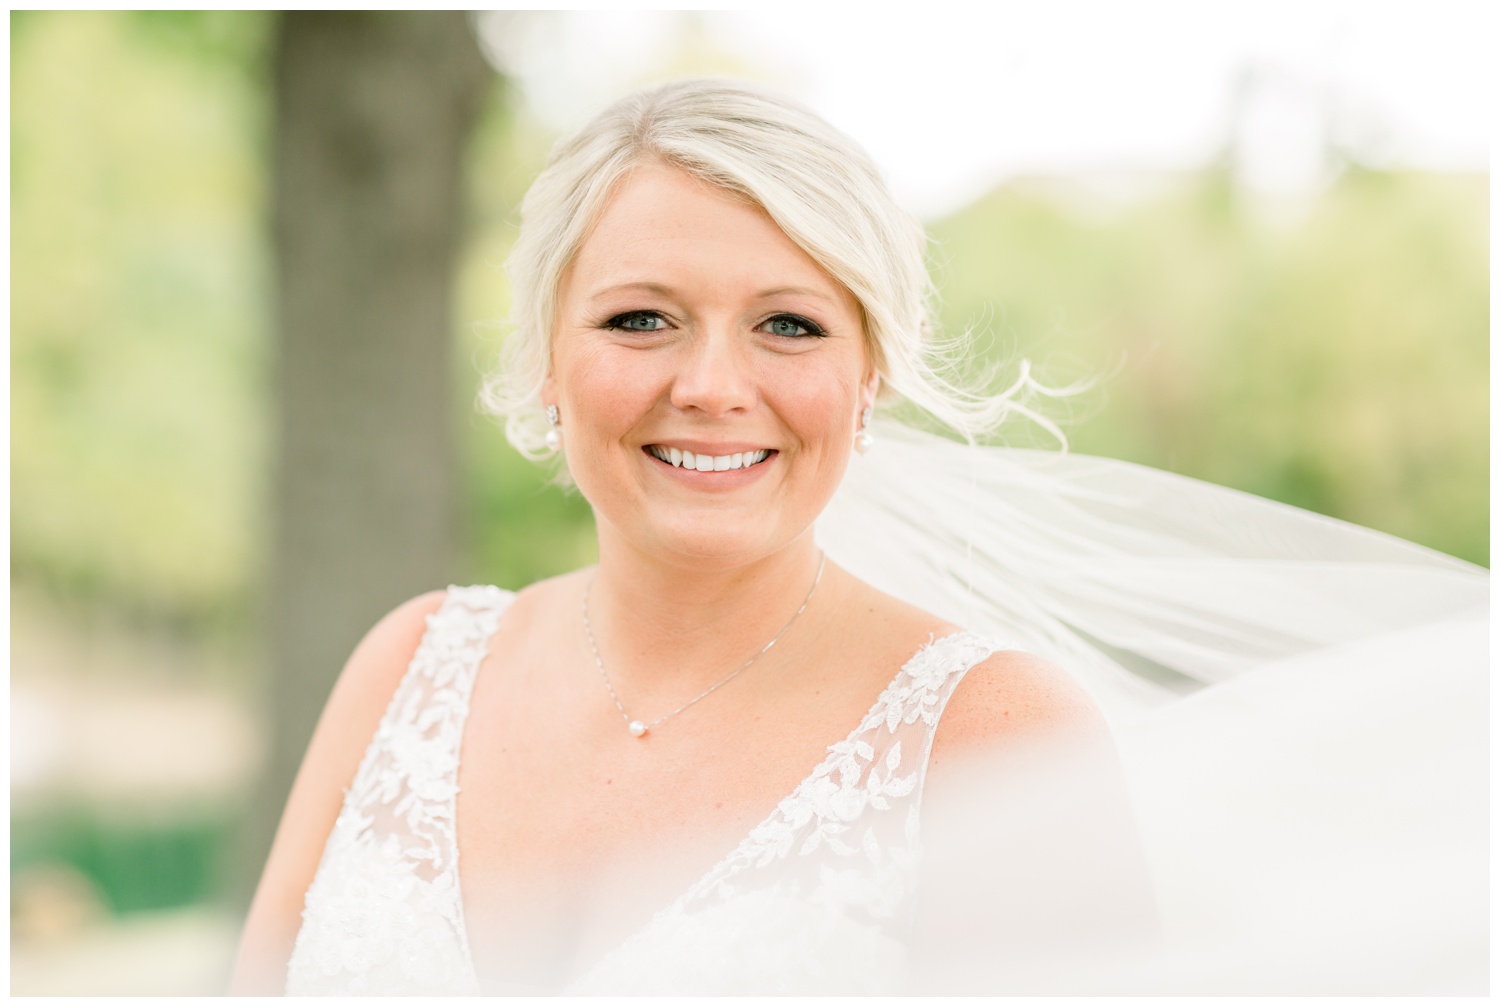 Bridal Portraits with Swooping Veil - Bride with Cathedral Veil